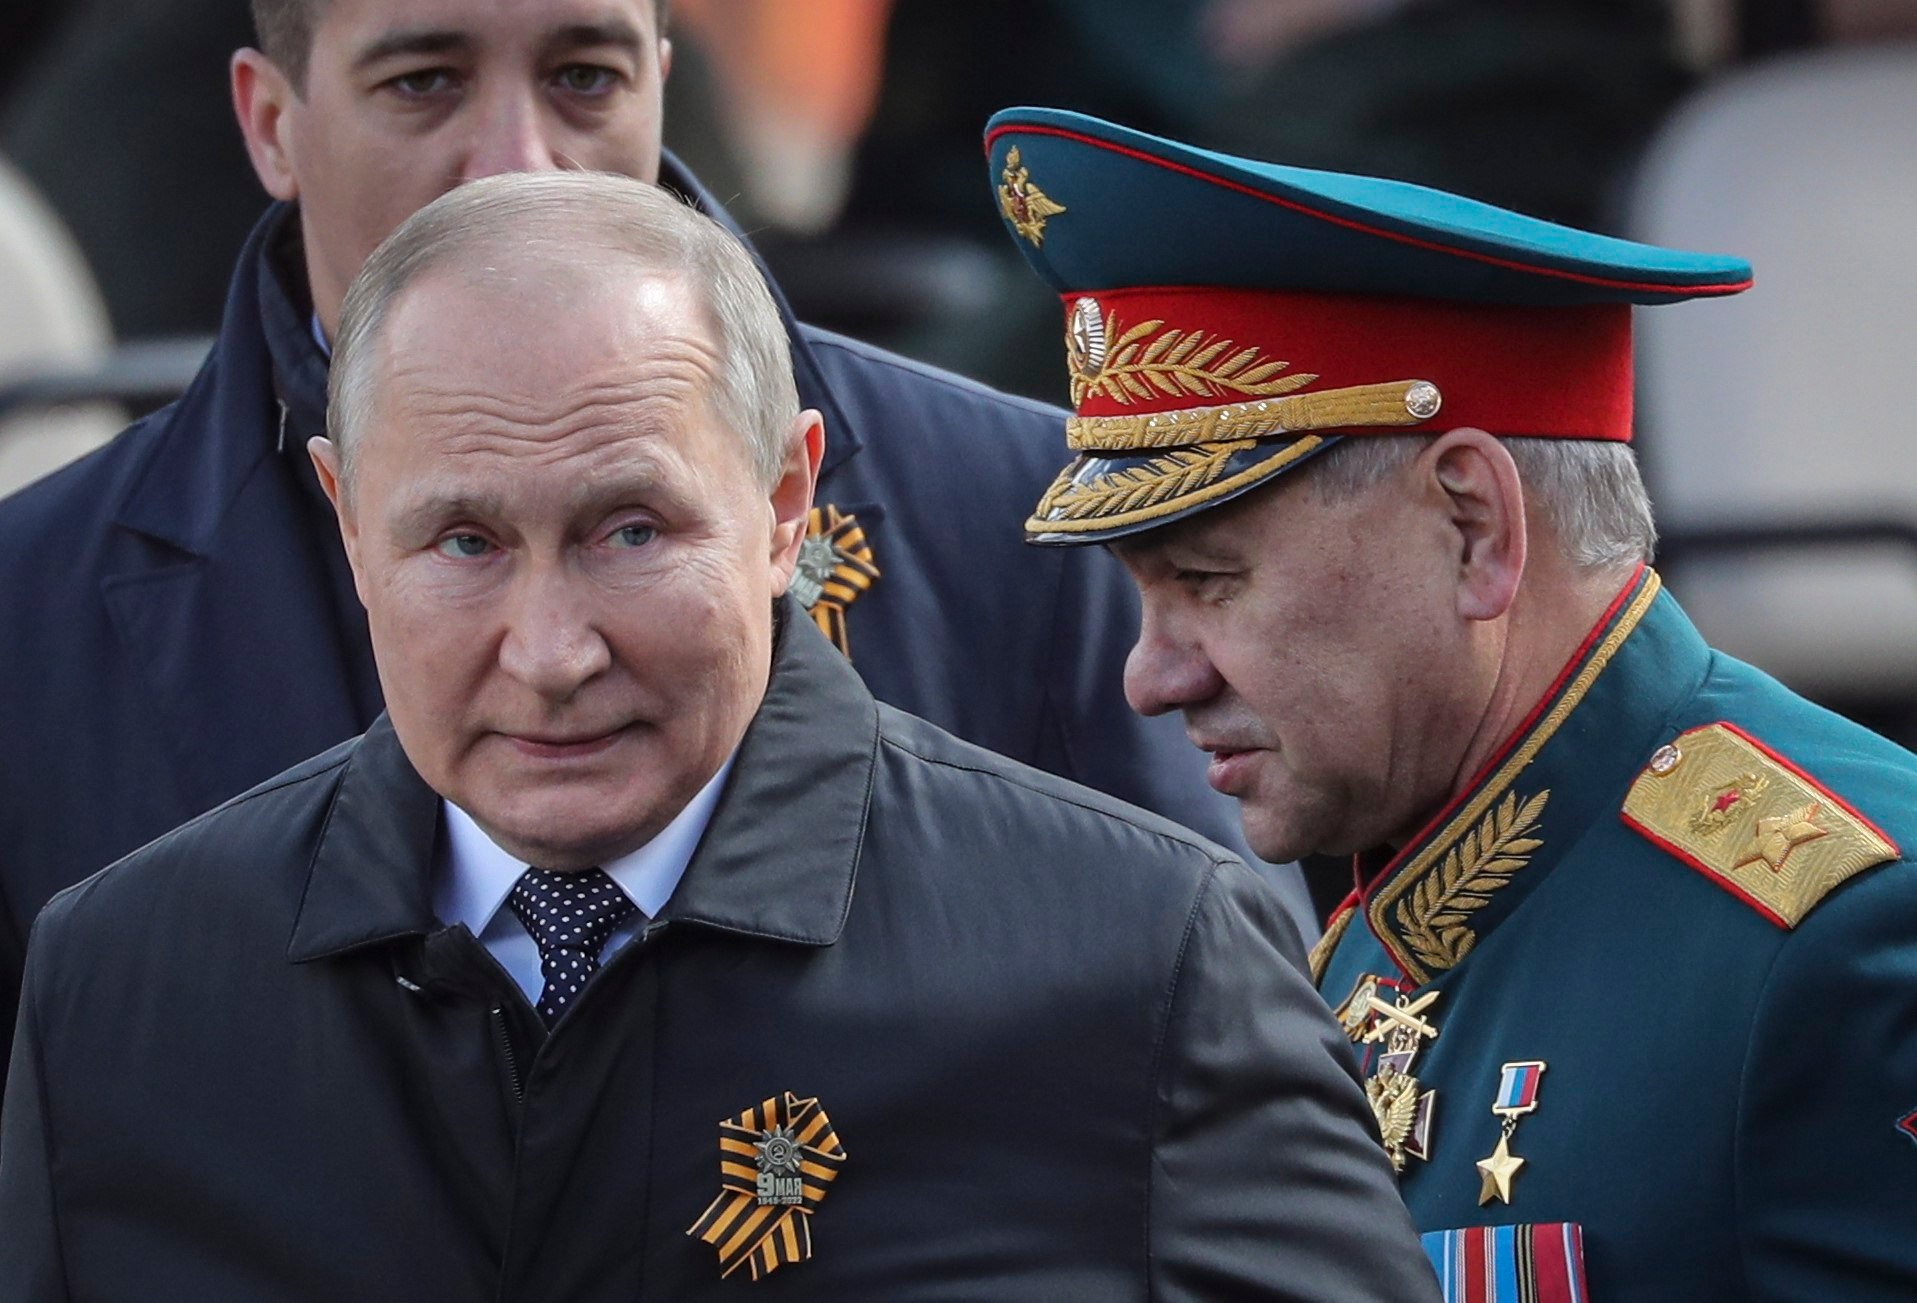 Russian President Vladimir Putin (L) and Russian Defense Minister Sergei Shoigu leave Red Square after the Victory Day military parade in Moscow, on May 9. Photo: EPA-EFE